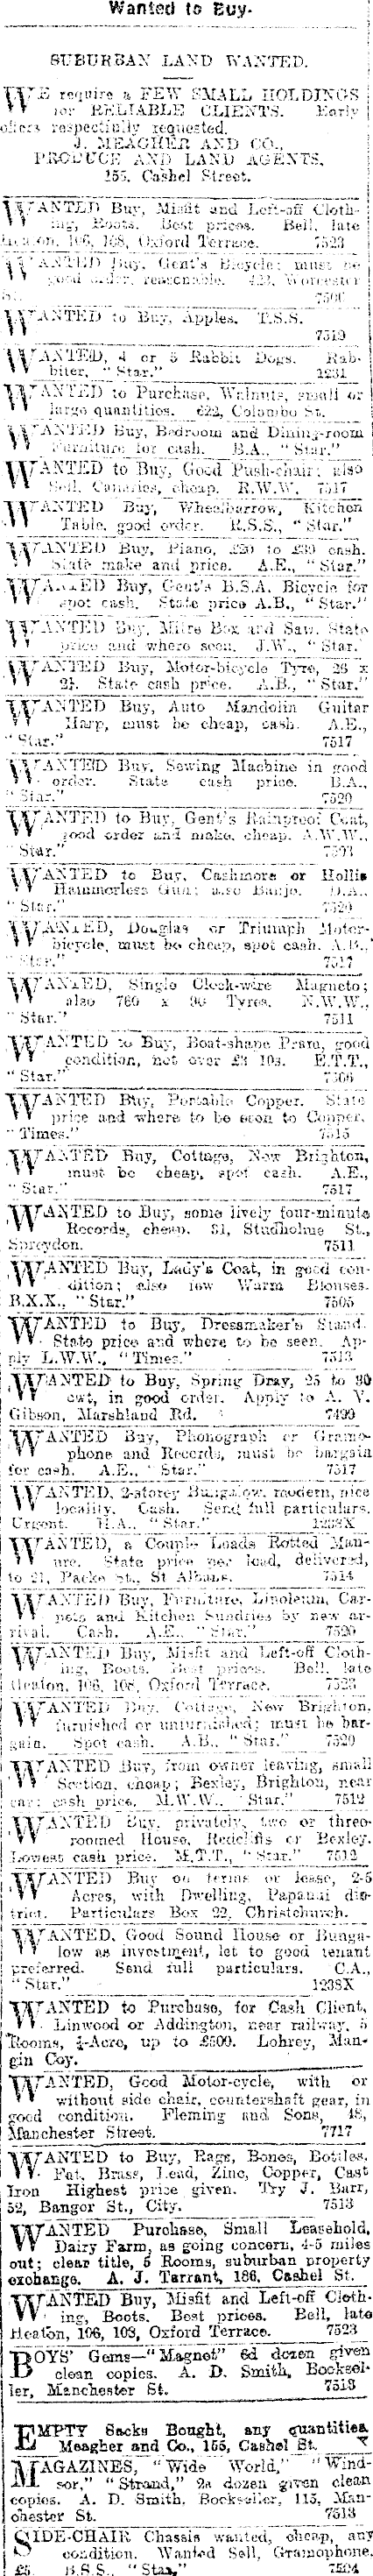 Papers Past Newspapers Star Christchurch 21 April 1917 Page 12 Advertisements Column 2